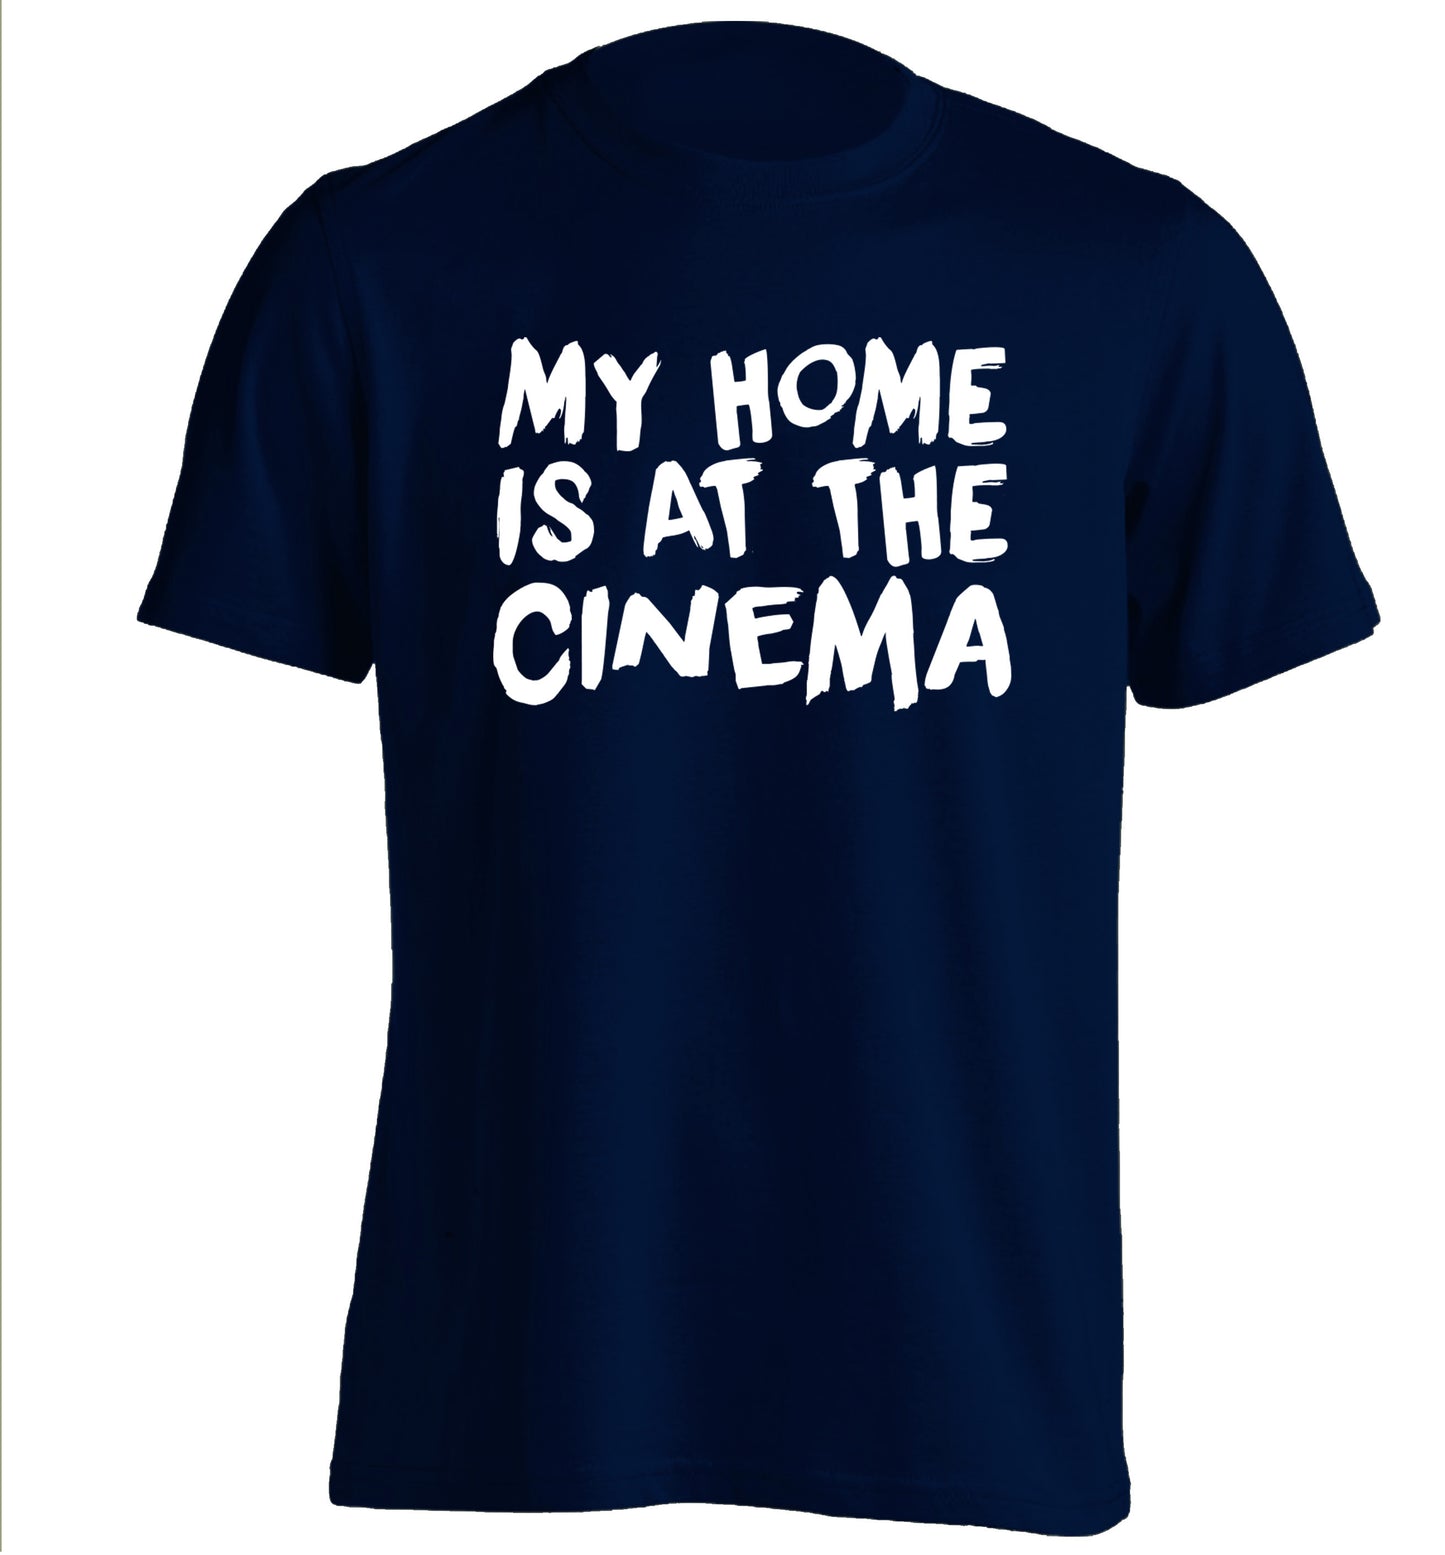 My home is at the cinema adults unisex navy Tshirt 2XL